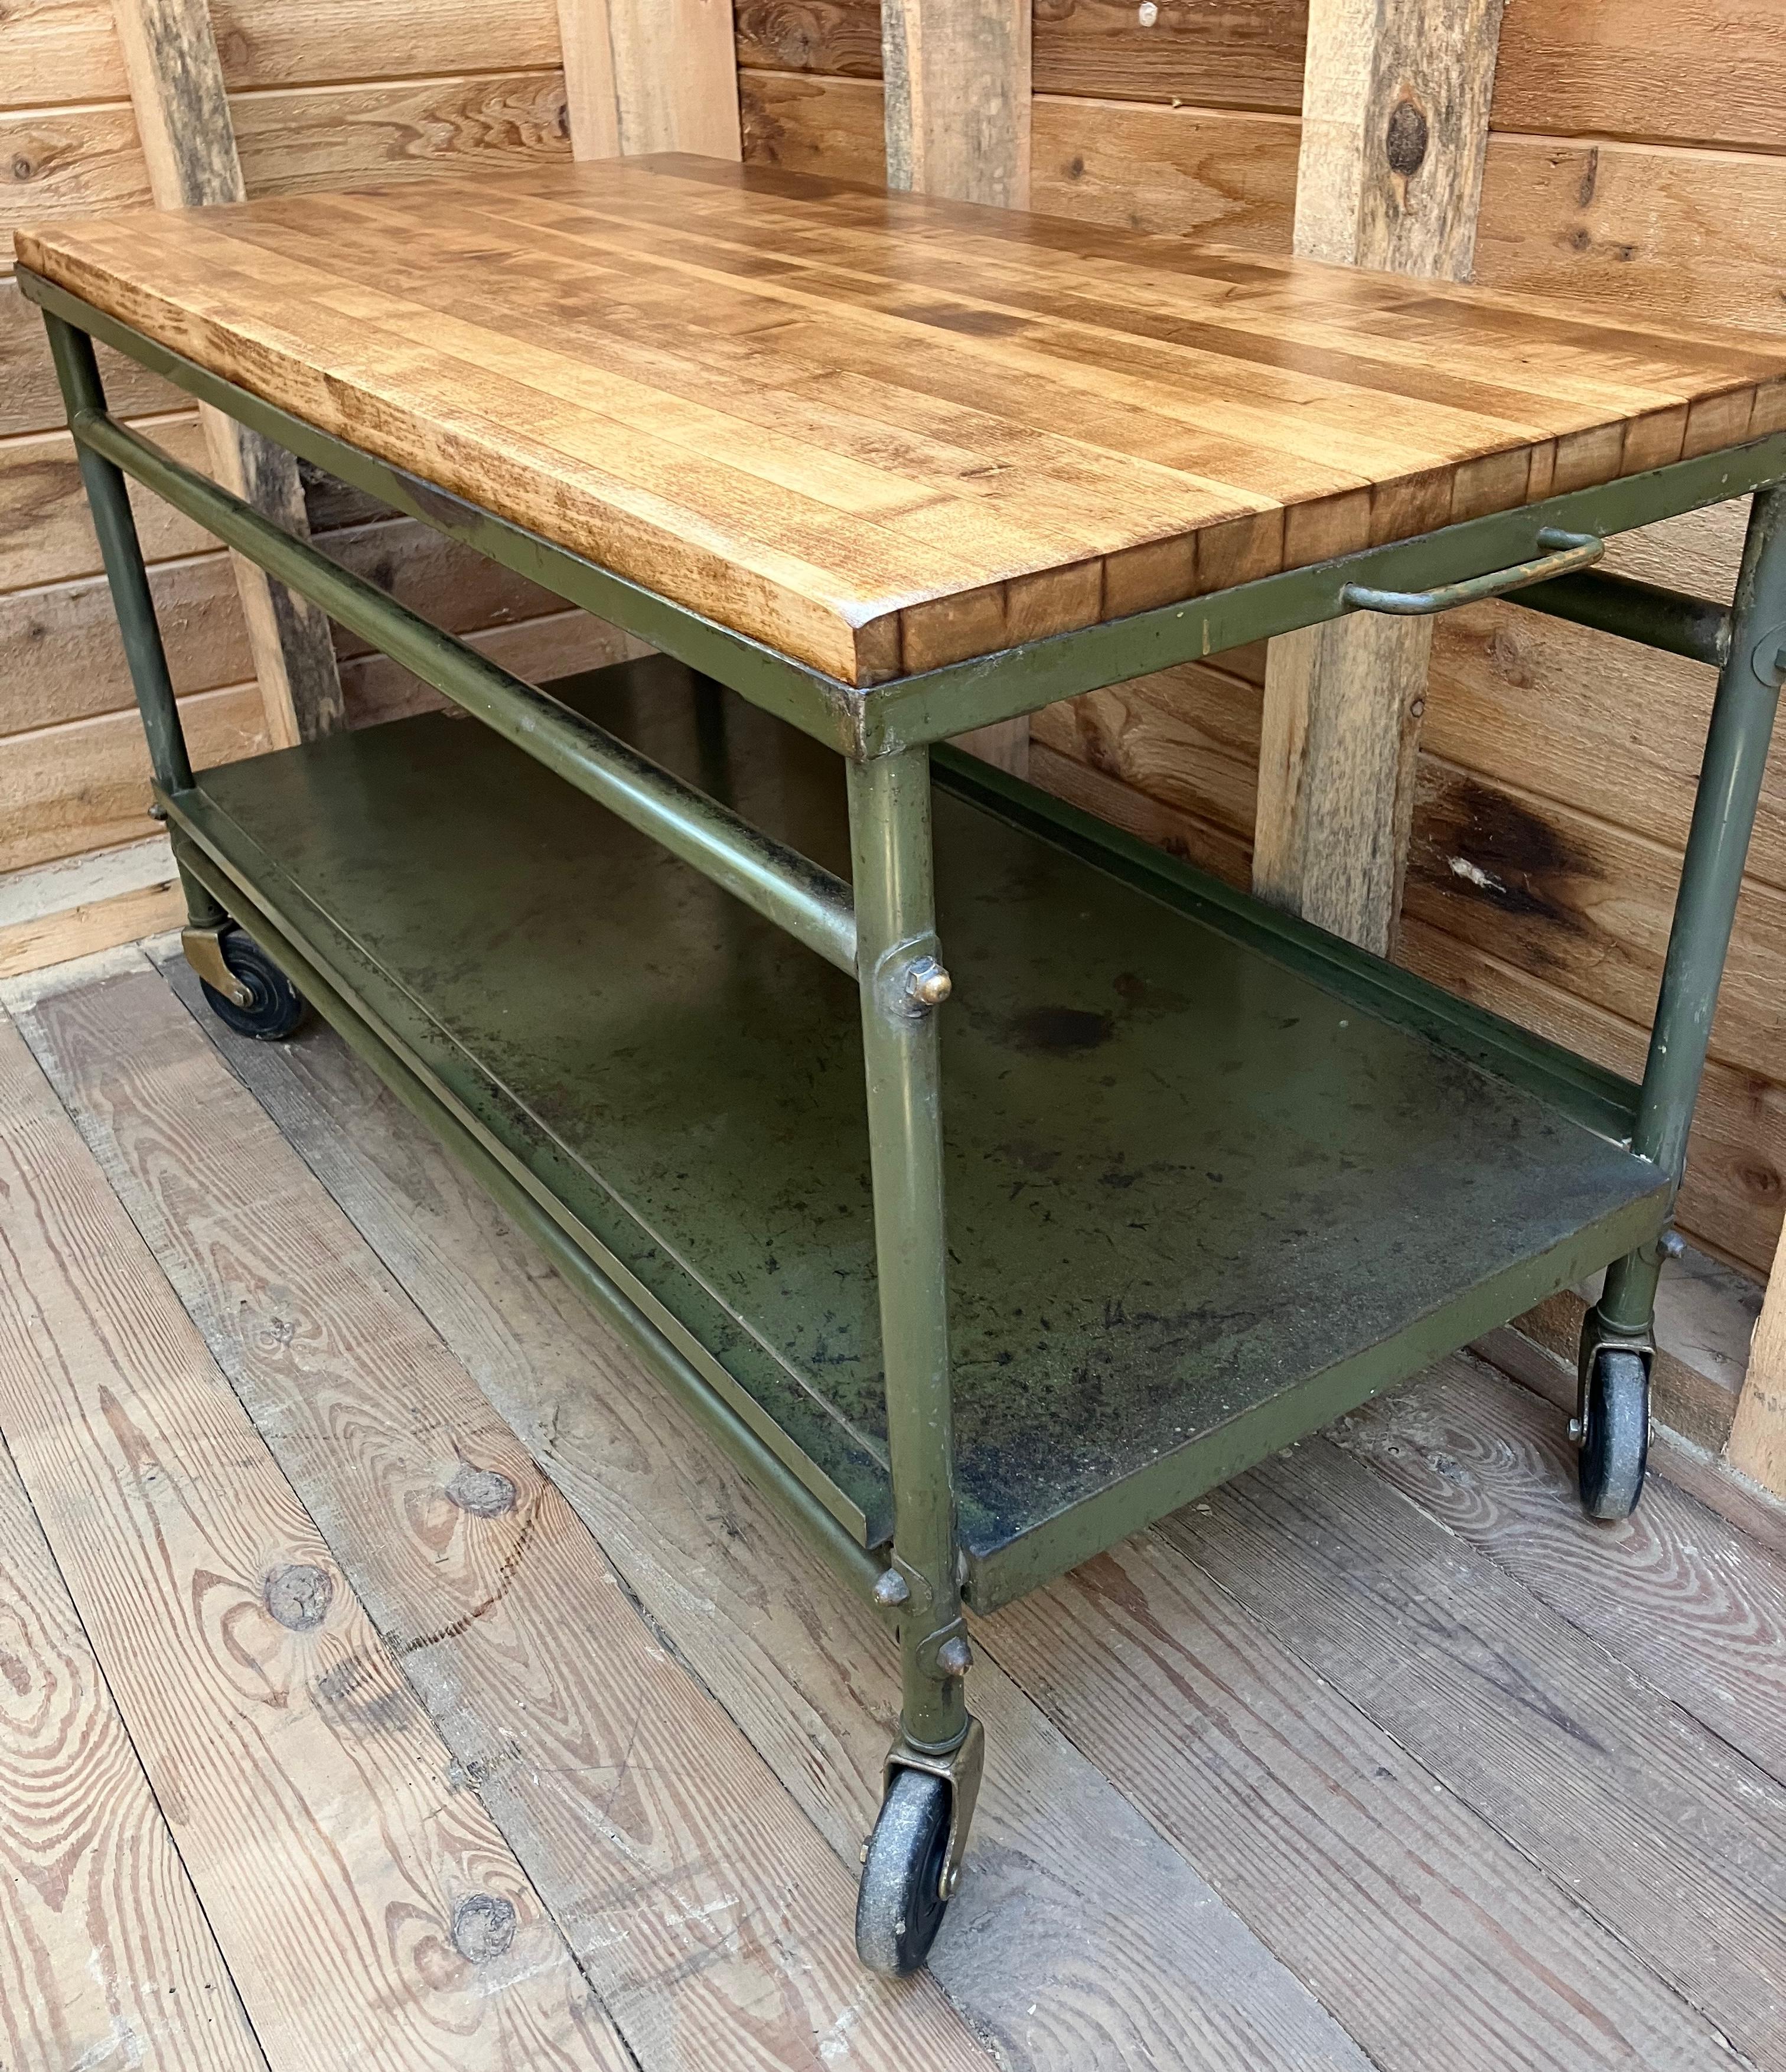 World War 2 era heavy duty steel cart possibly US Army with restored vintage butcher block top. Paint shows wear and some discoloration. Very sturdy and wheels easily. 
Nice cocktail table, tv stand, or mud room bench. Industrial design that lends